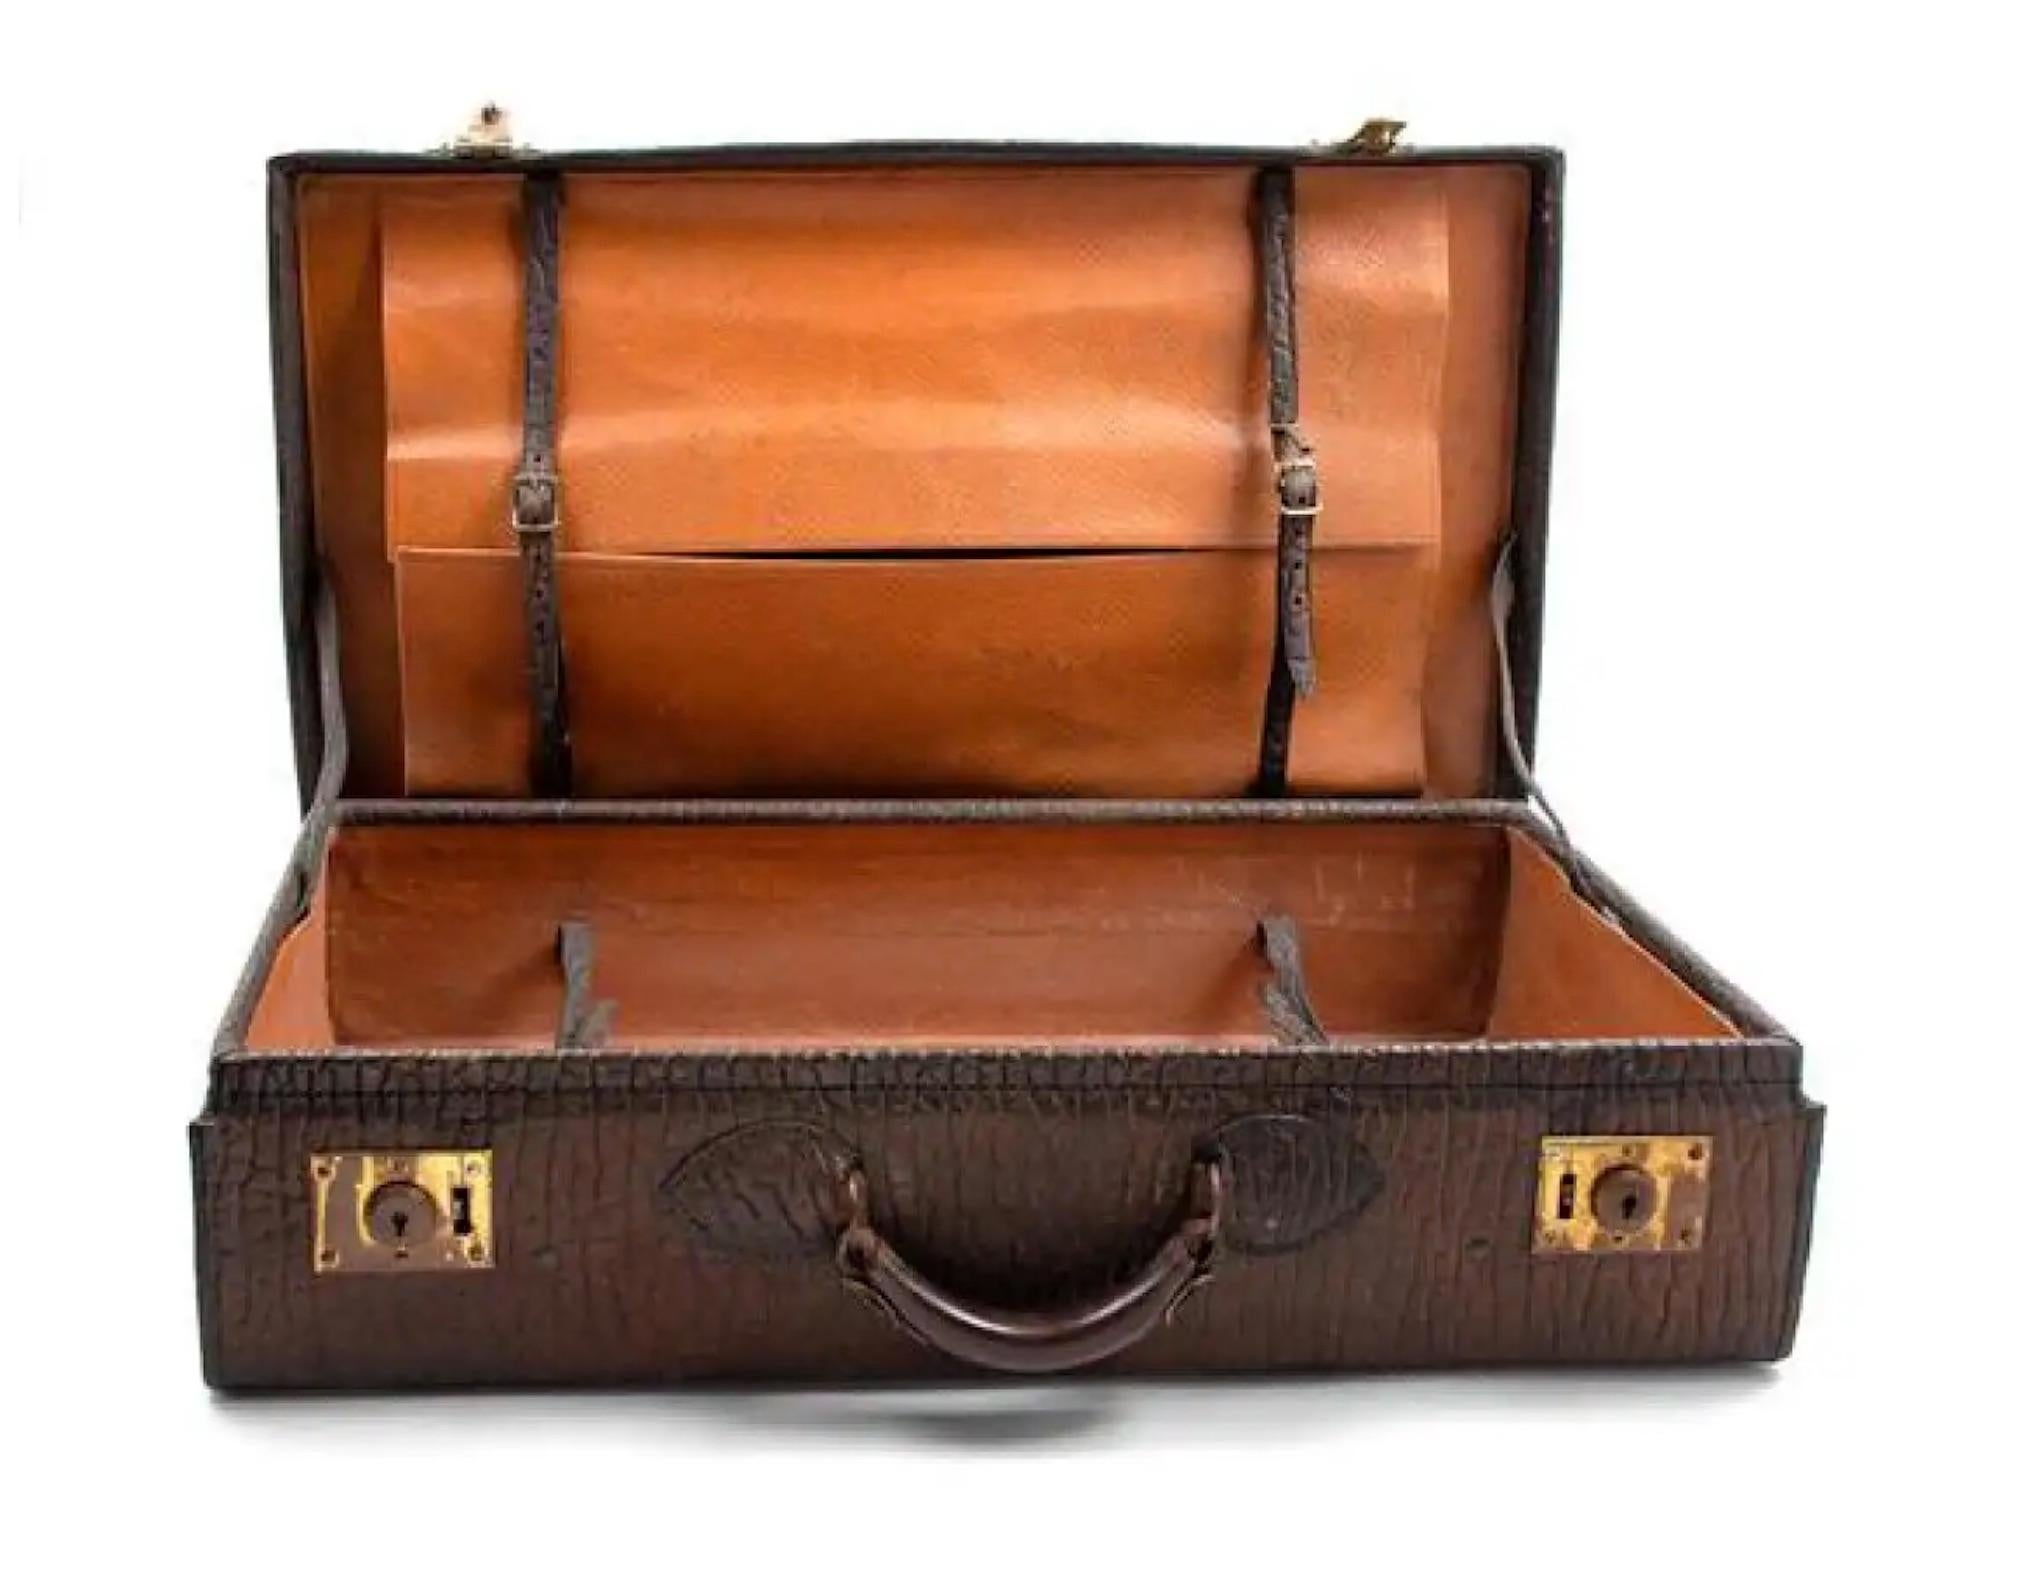 Handsome 19th century suitcase with embossed leather. Great as a collection used as a side table or coffee table.